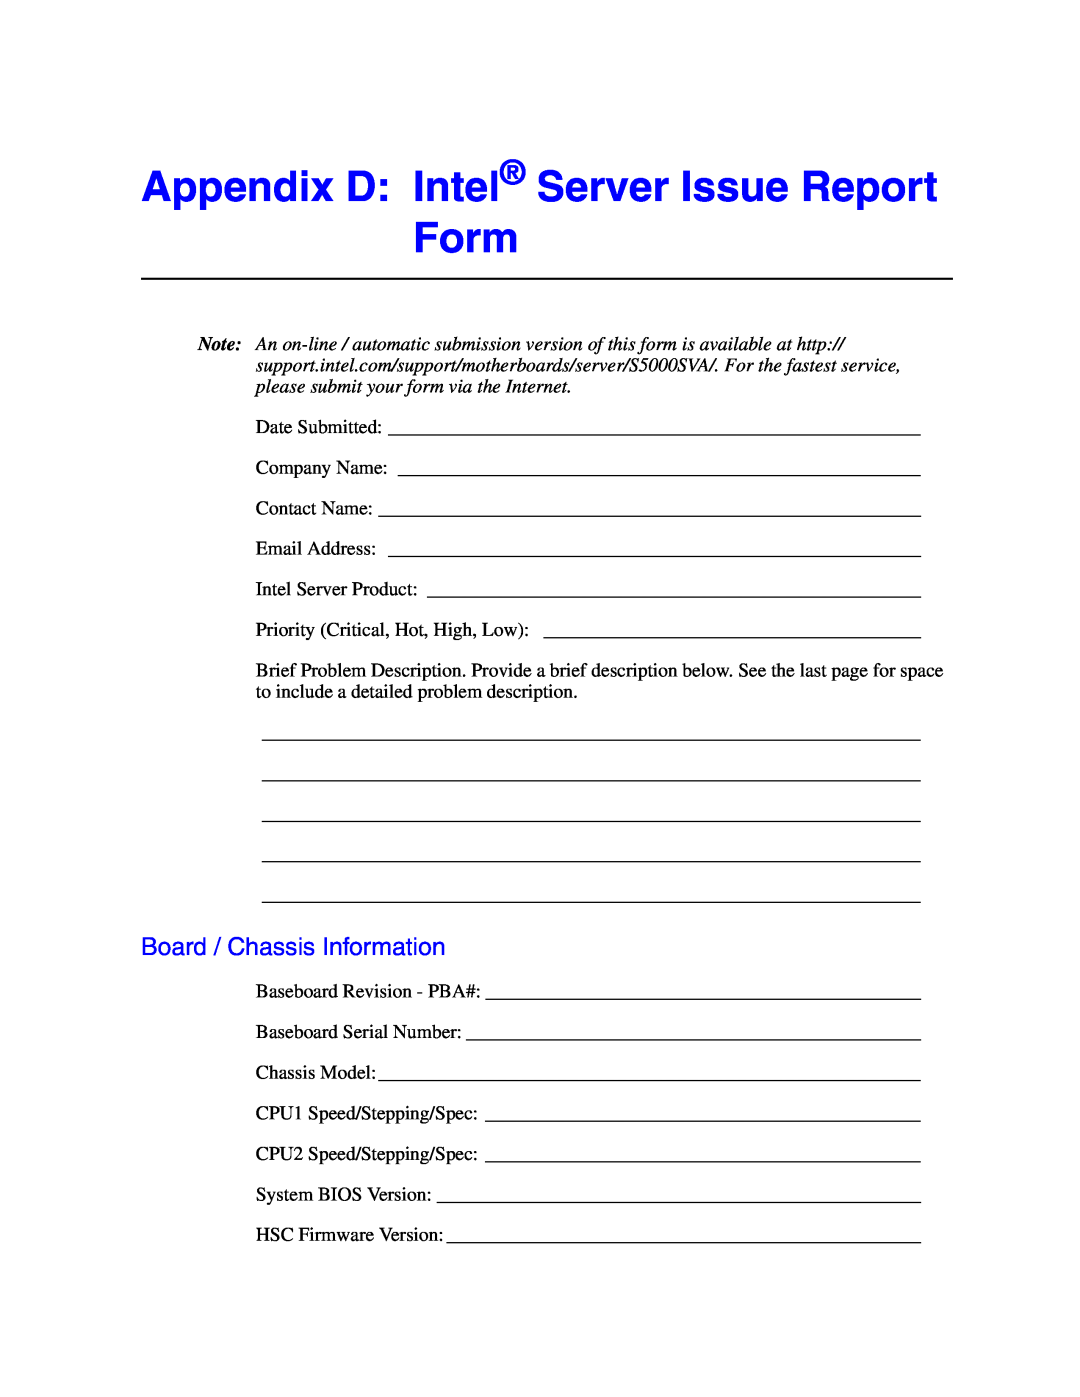 Intel S5000VSA manual Appendix D Intel Server Issue Report Form, Board / Chassis Information 